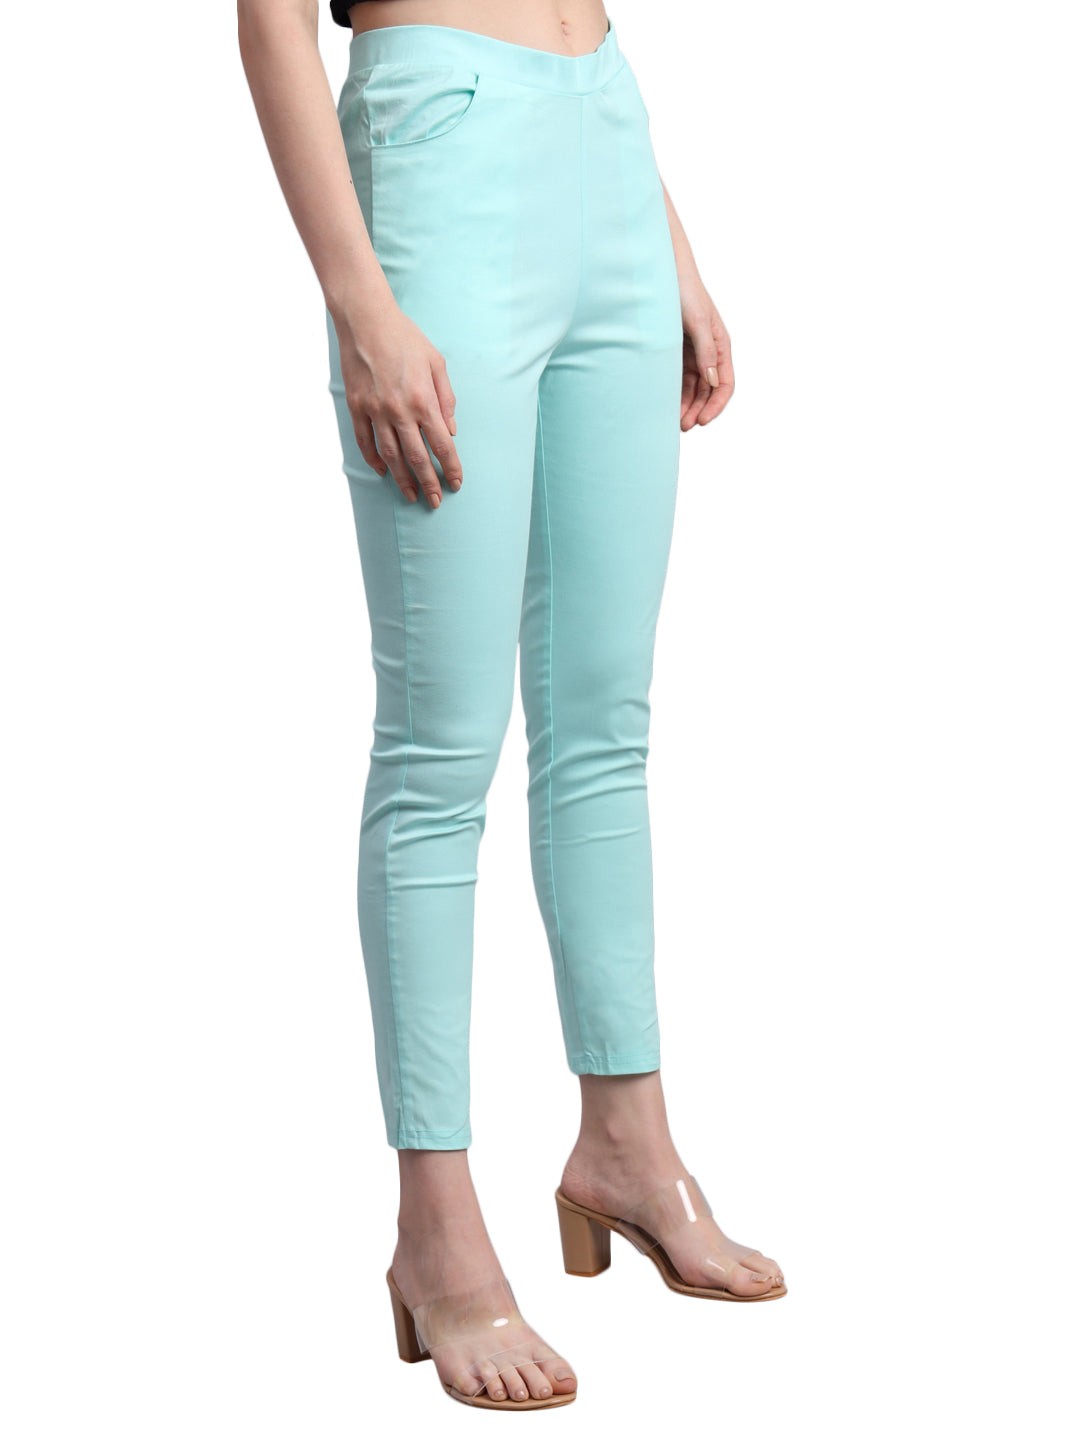 Vastraa Fusion Glamorous Cotton Stretchable Casual Cigarette Lycra Pants for Ladies/Women